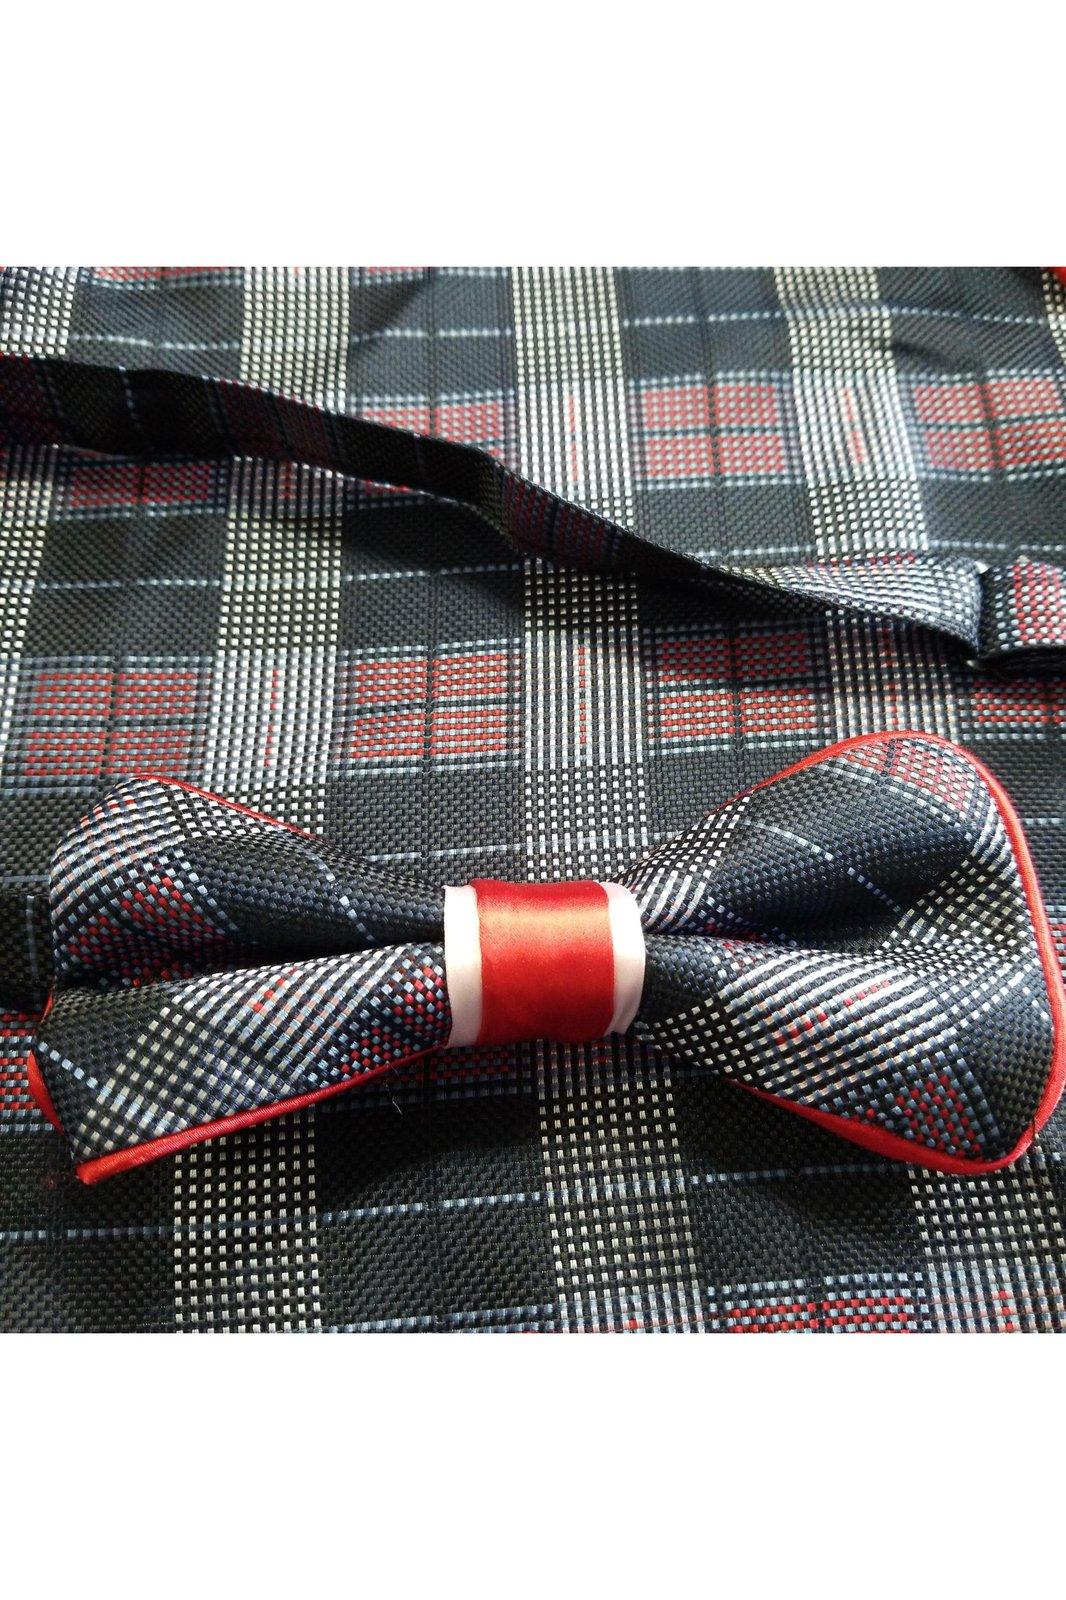 Unbranded men's custom blue and red bow tie and scarf